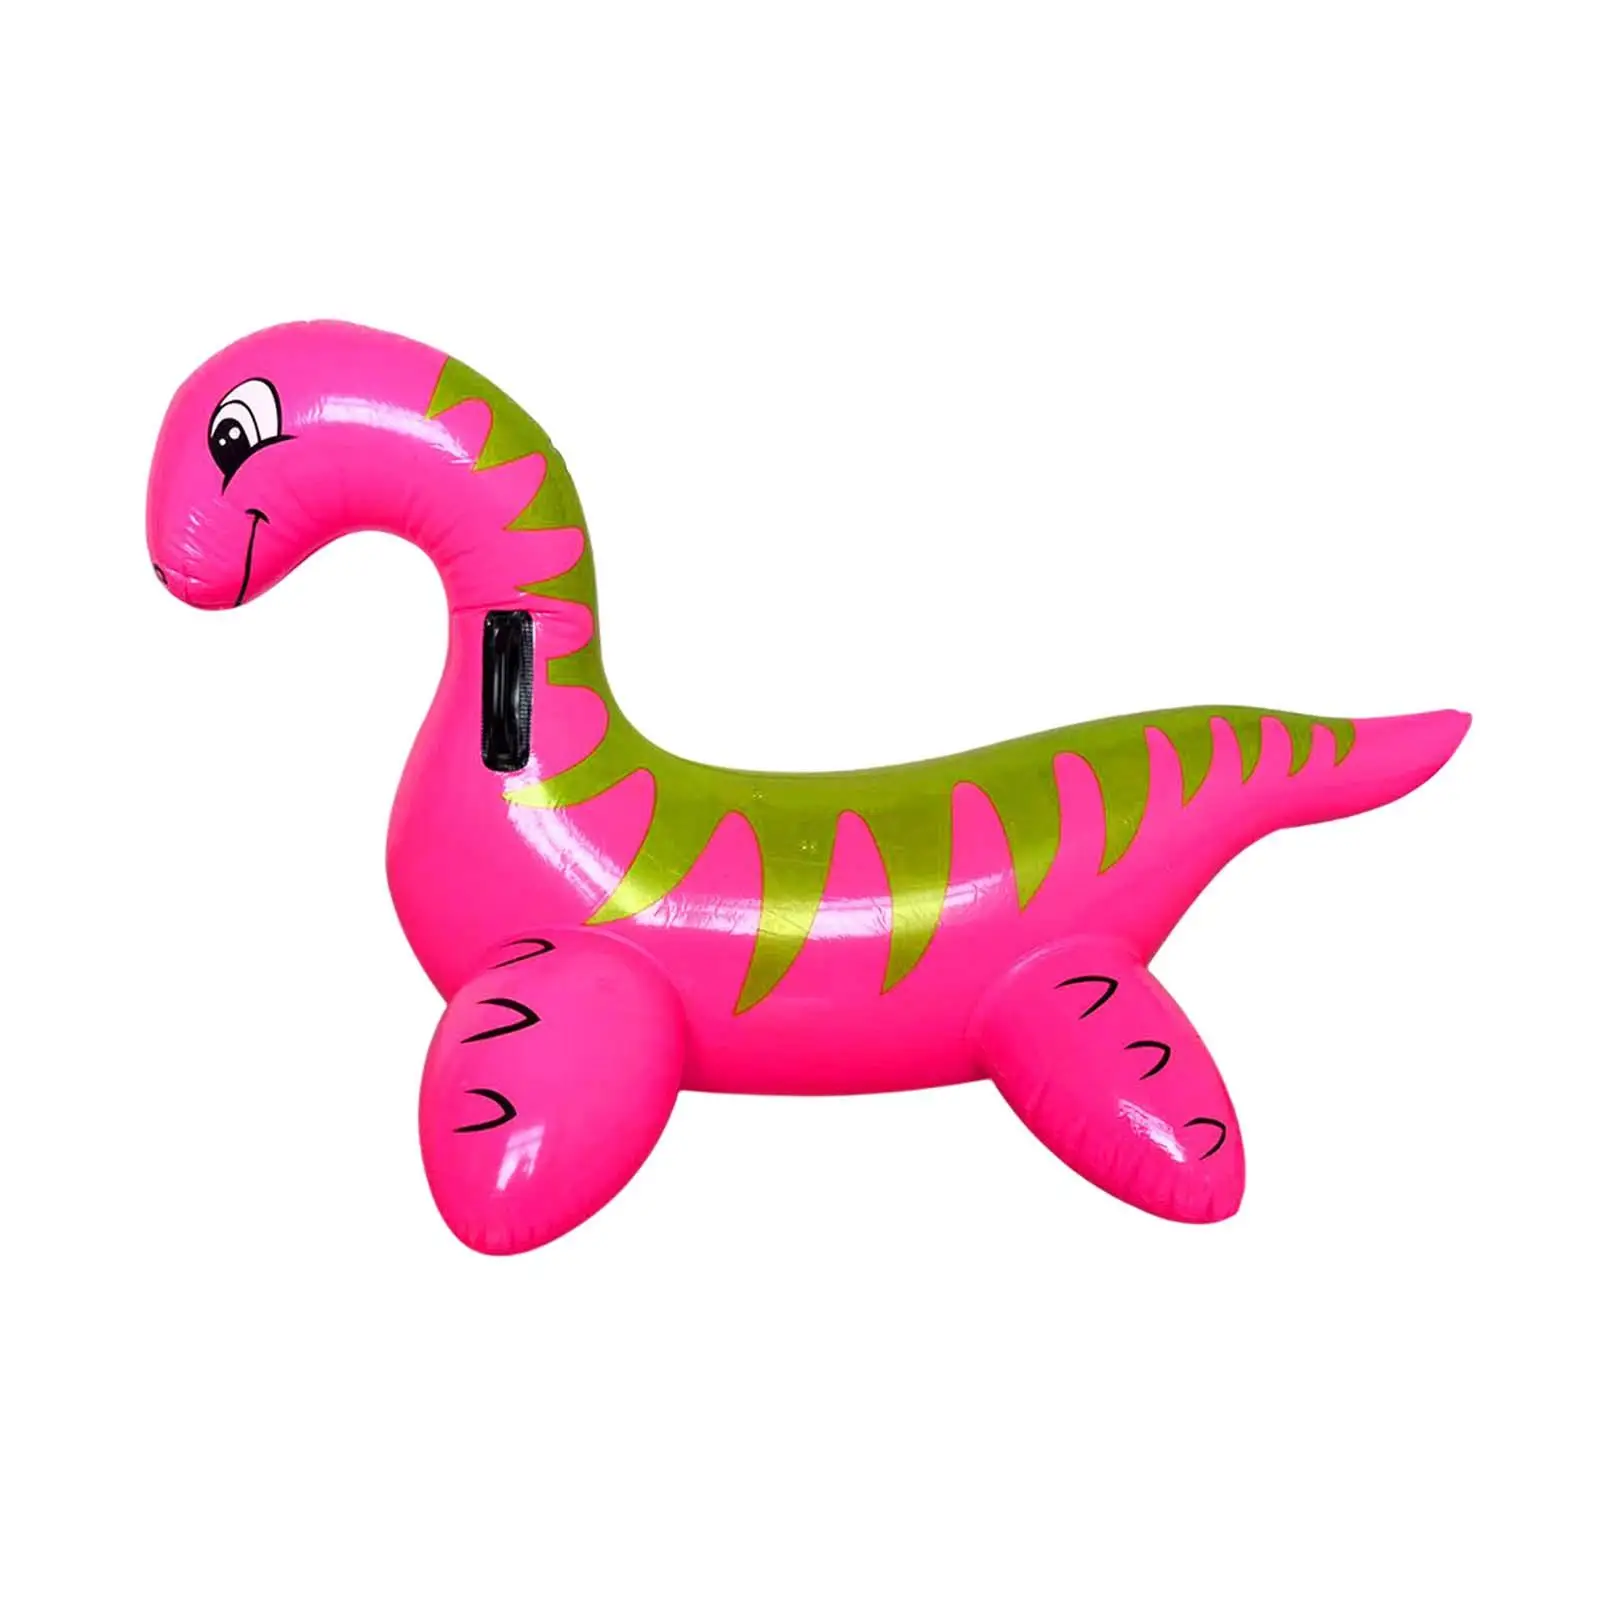 Dinosaur Pool Floats Water Games Lounge Toys Pool Toys Inflatable Swimming pool floats for Beach Party Swimming gifts Adults